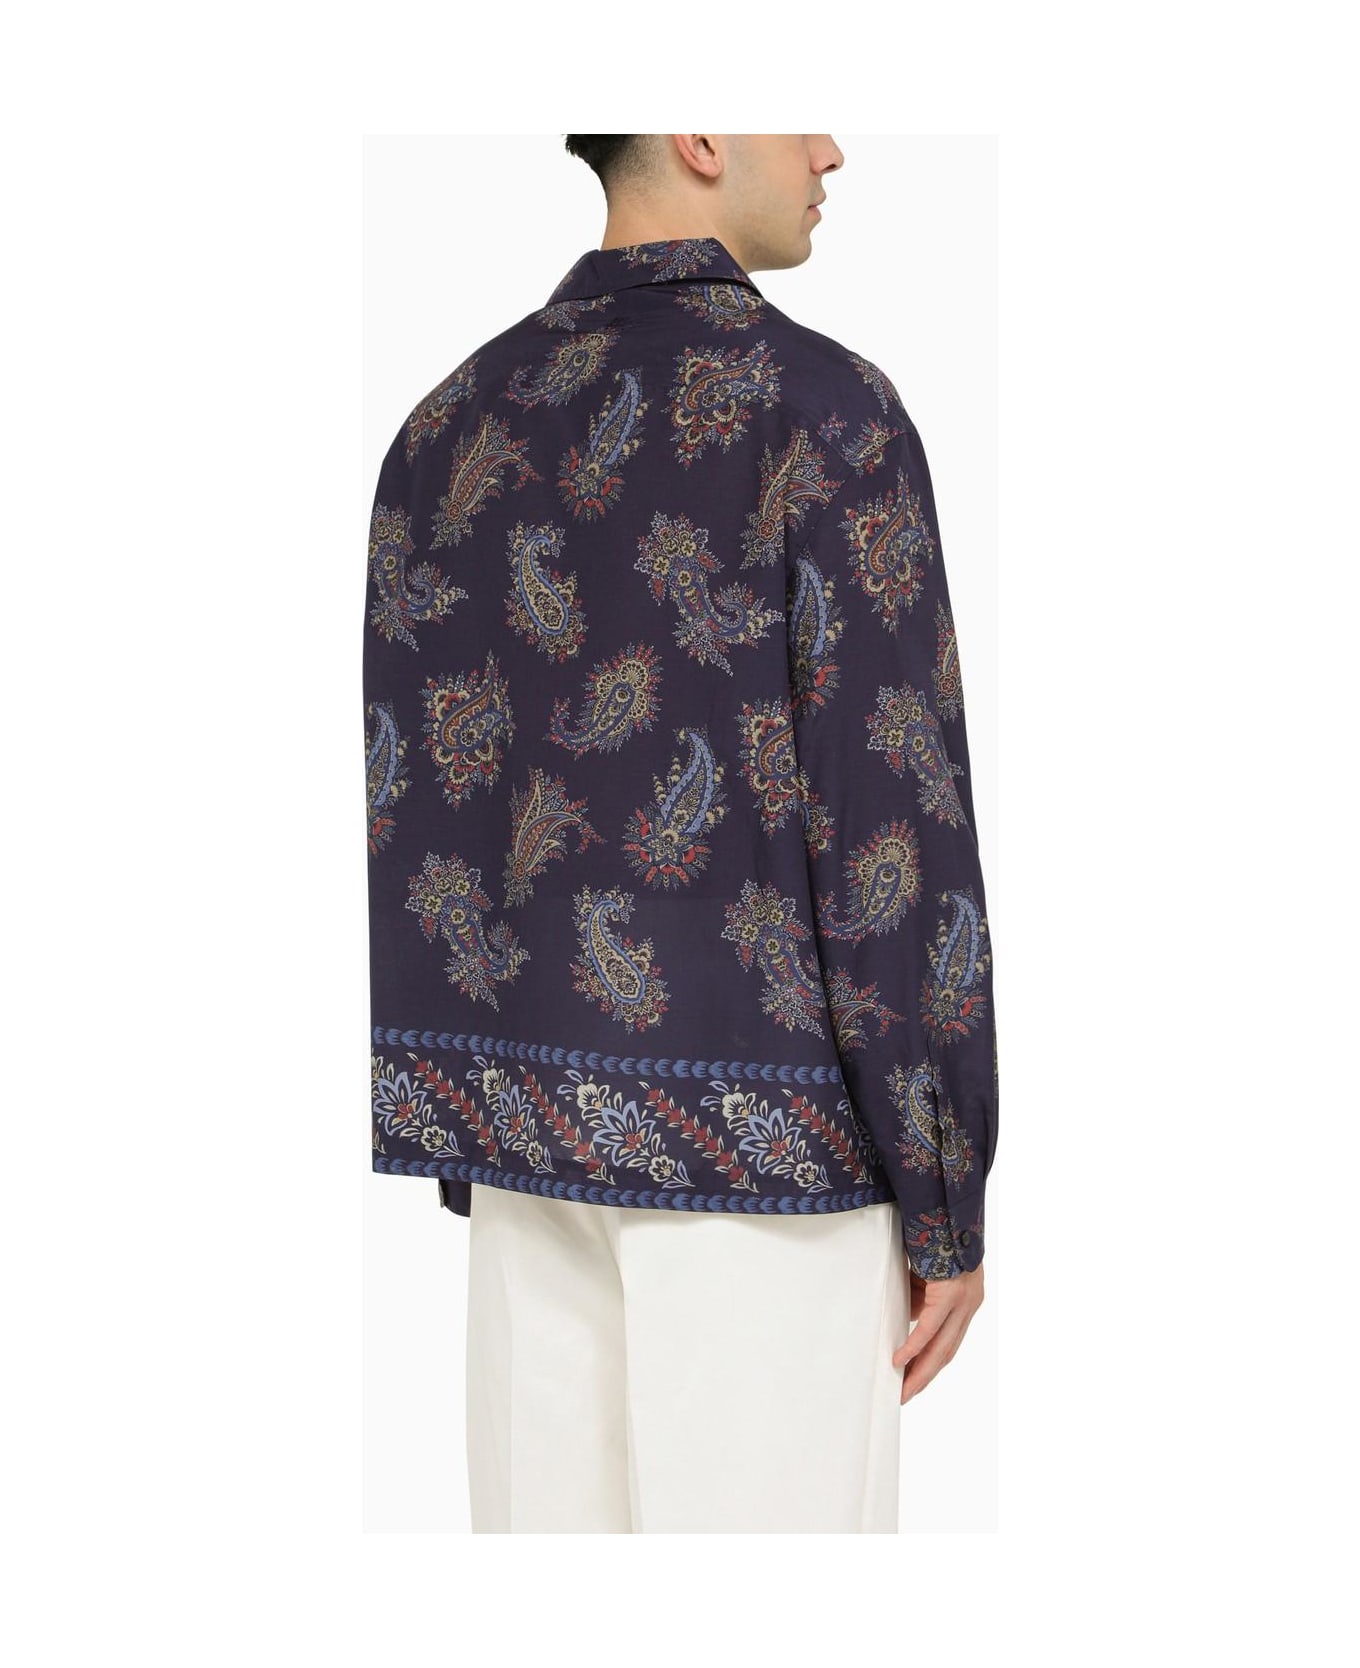 Etro Blue Bowling Shirt With Paisley Pattern - Blue